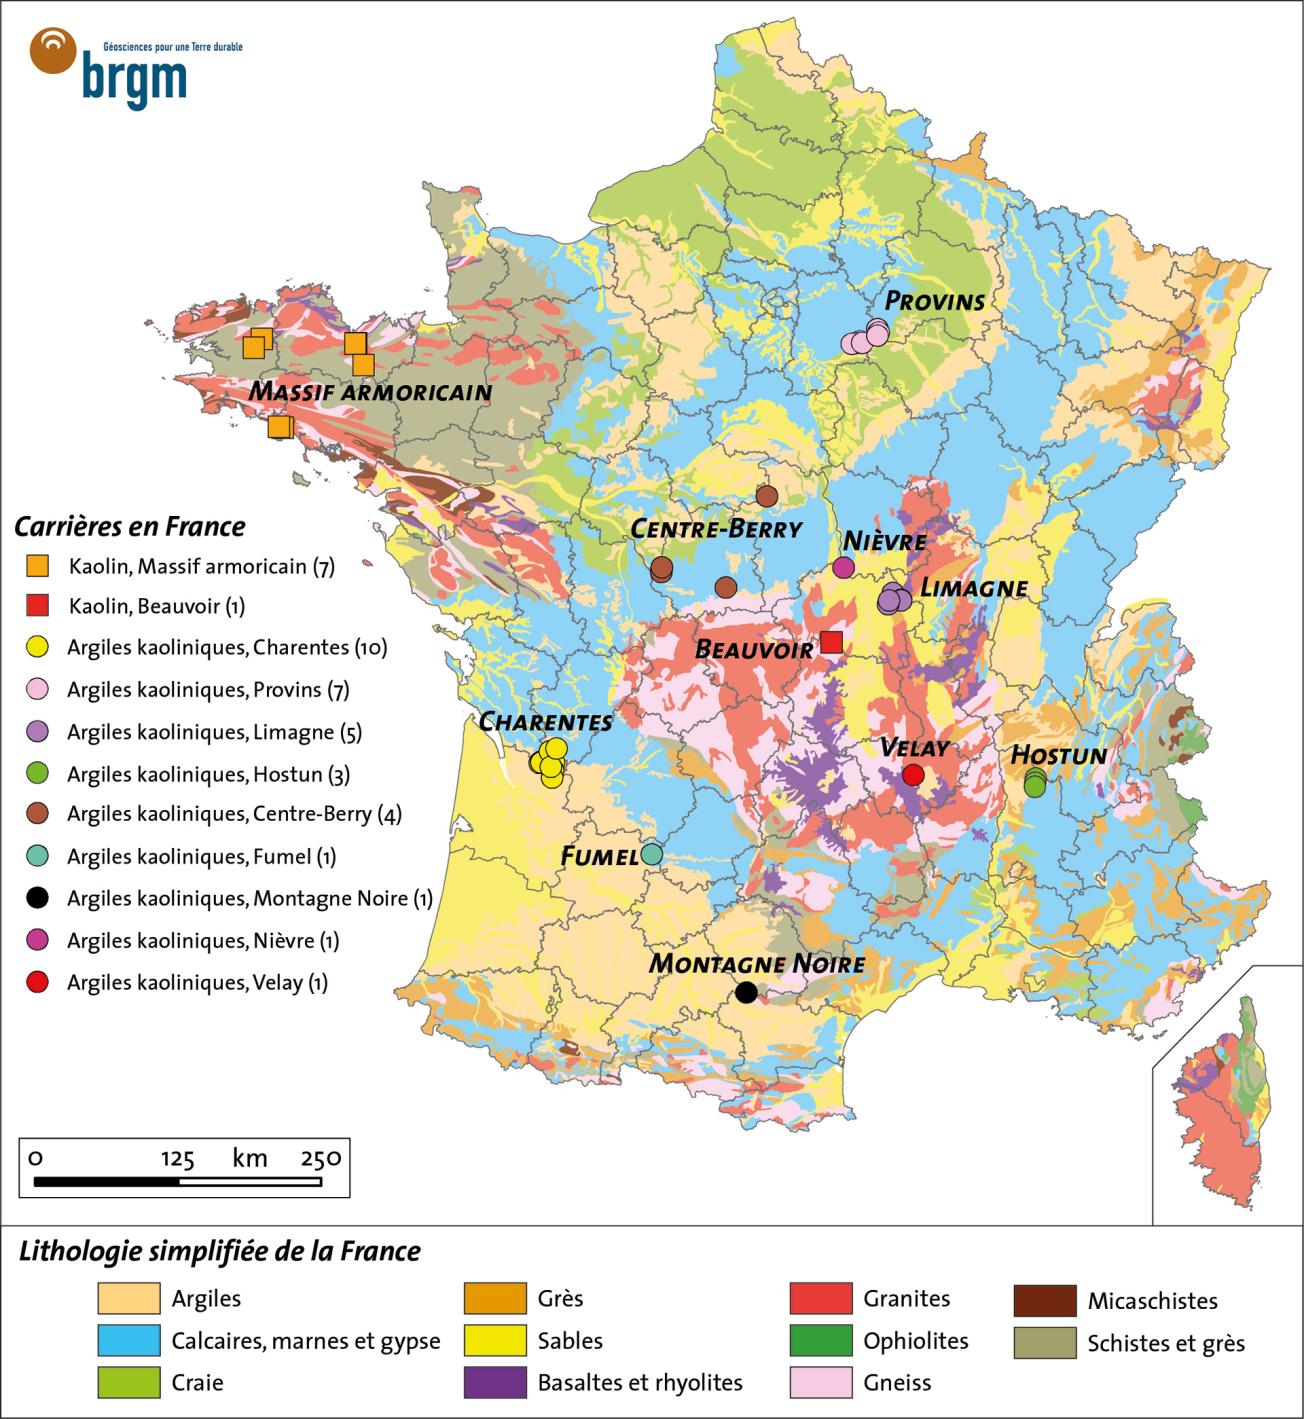 Quarries exploiting kaolin and kaolinic clays in France 